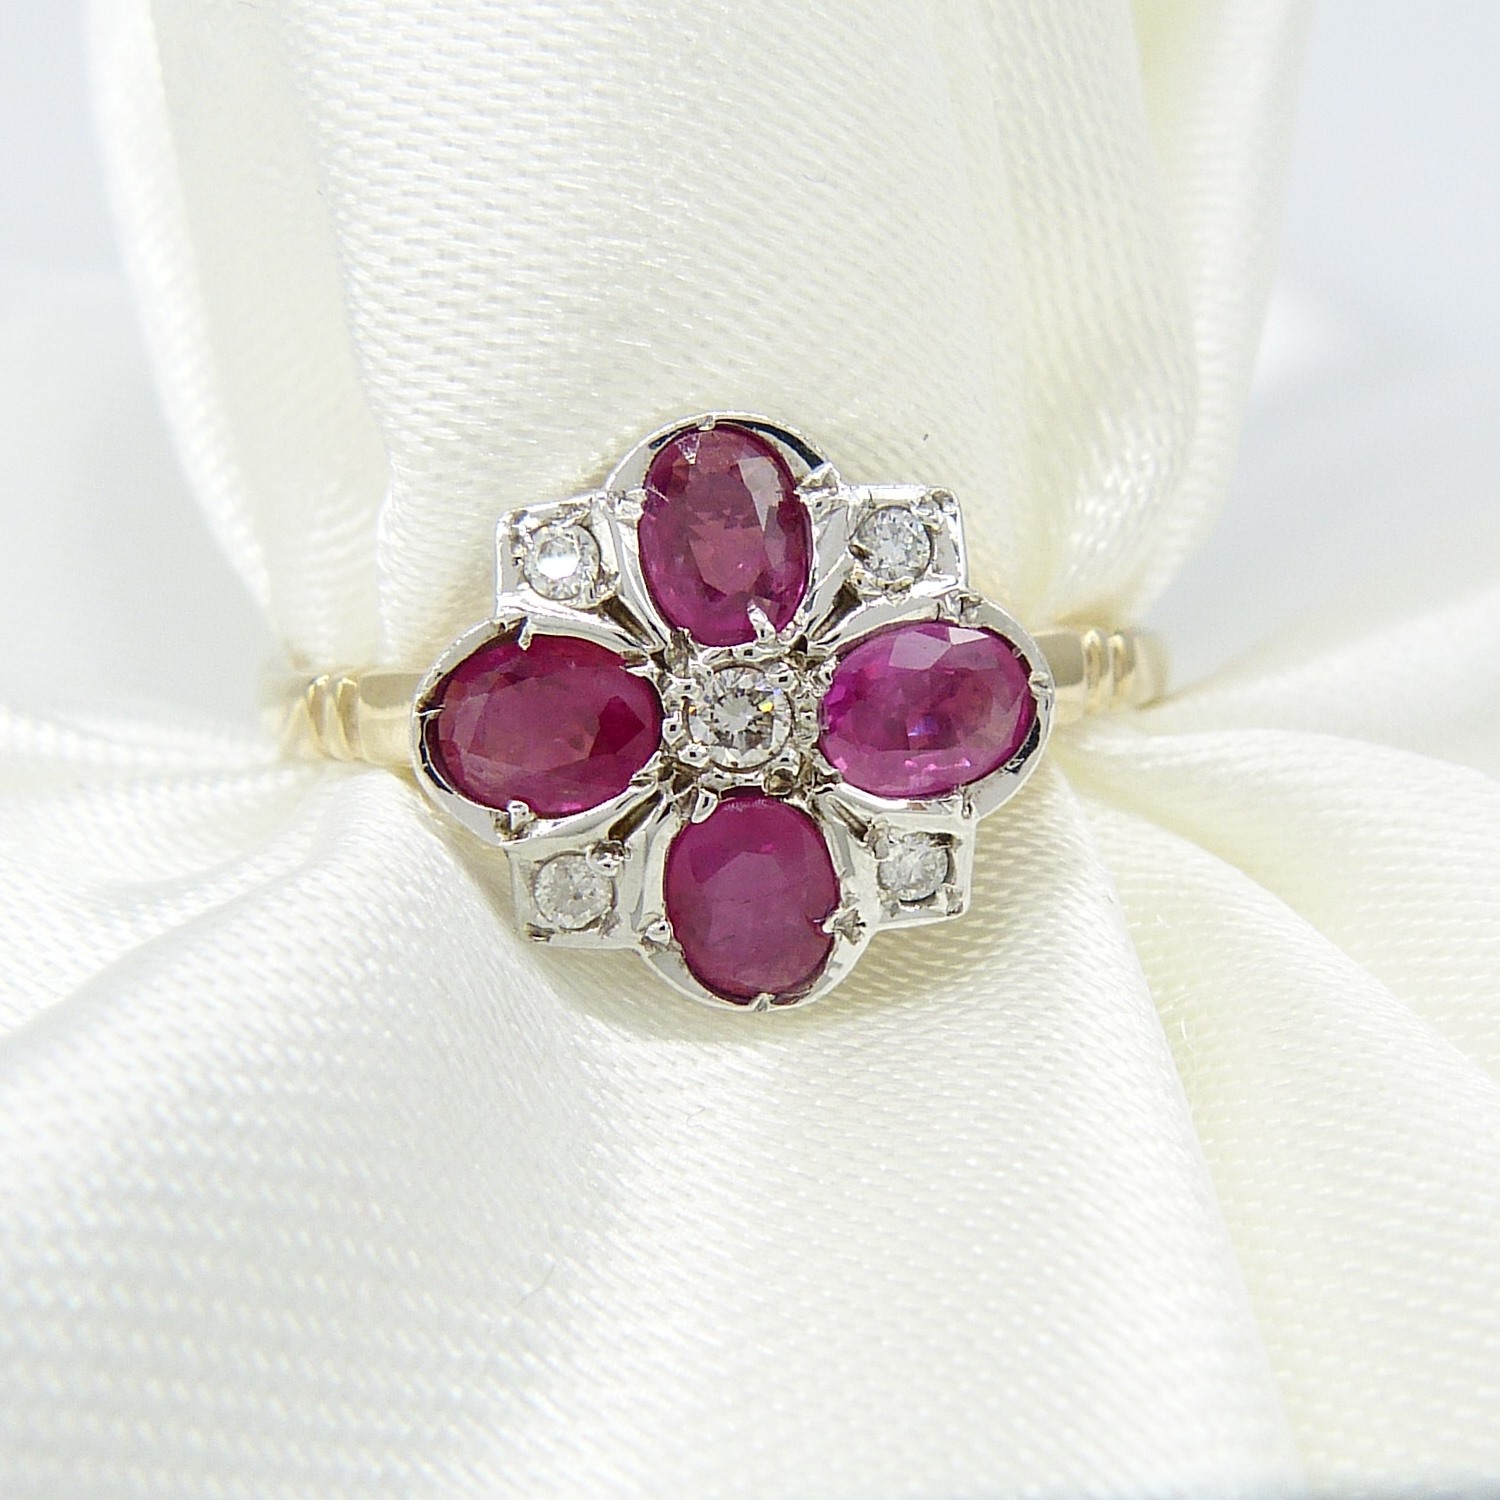 Yellow and White Gold Vintage-Style Ring Set With Rubies and Diamonds - Image 6 of 6